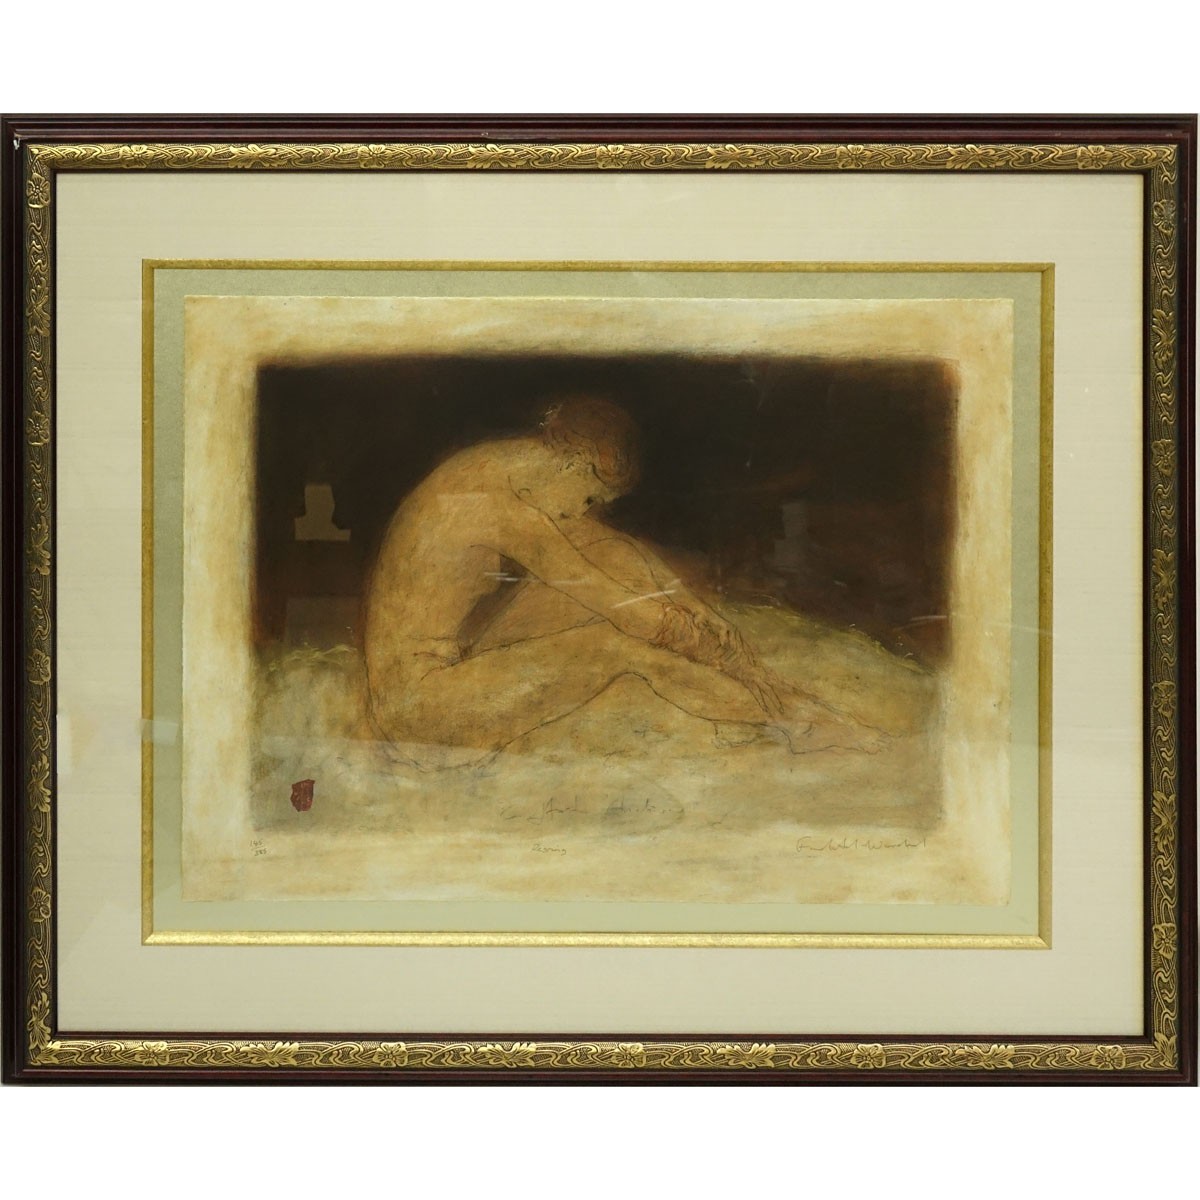 Roy Fairchild-Woodard, British (born 1953) Aquatint "Resting" Signed, Title, and Numbered 145/385 on Lower Margin. Good condition.